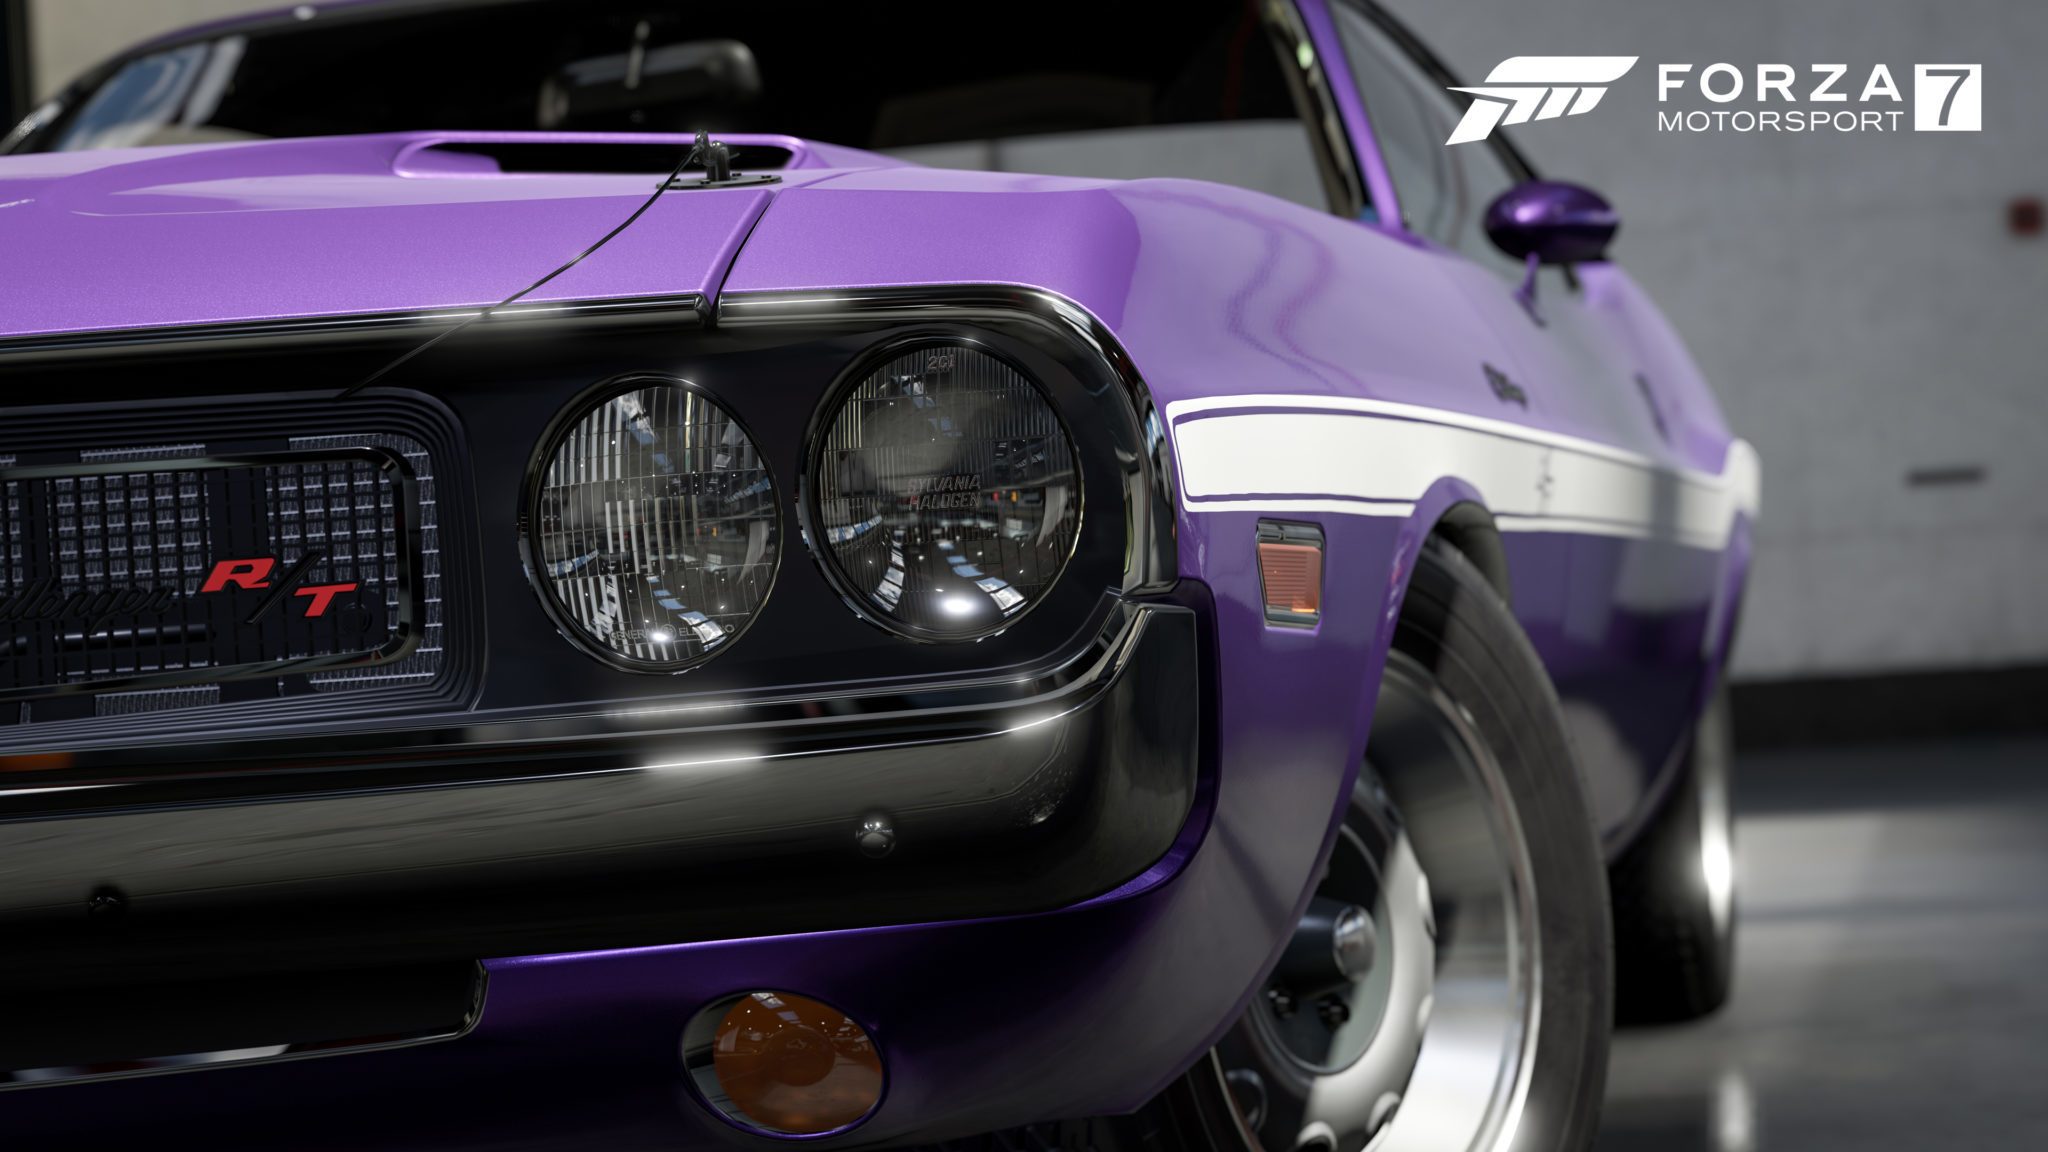 Forza Horizon 5 PC specs and requirements